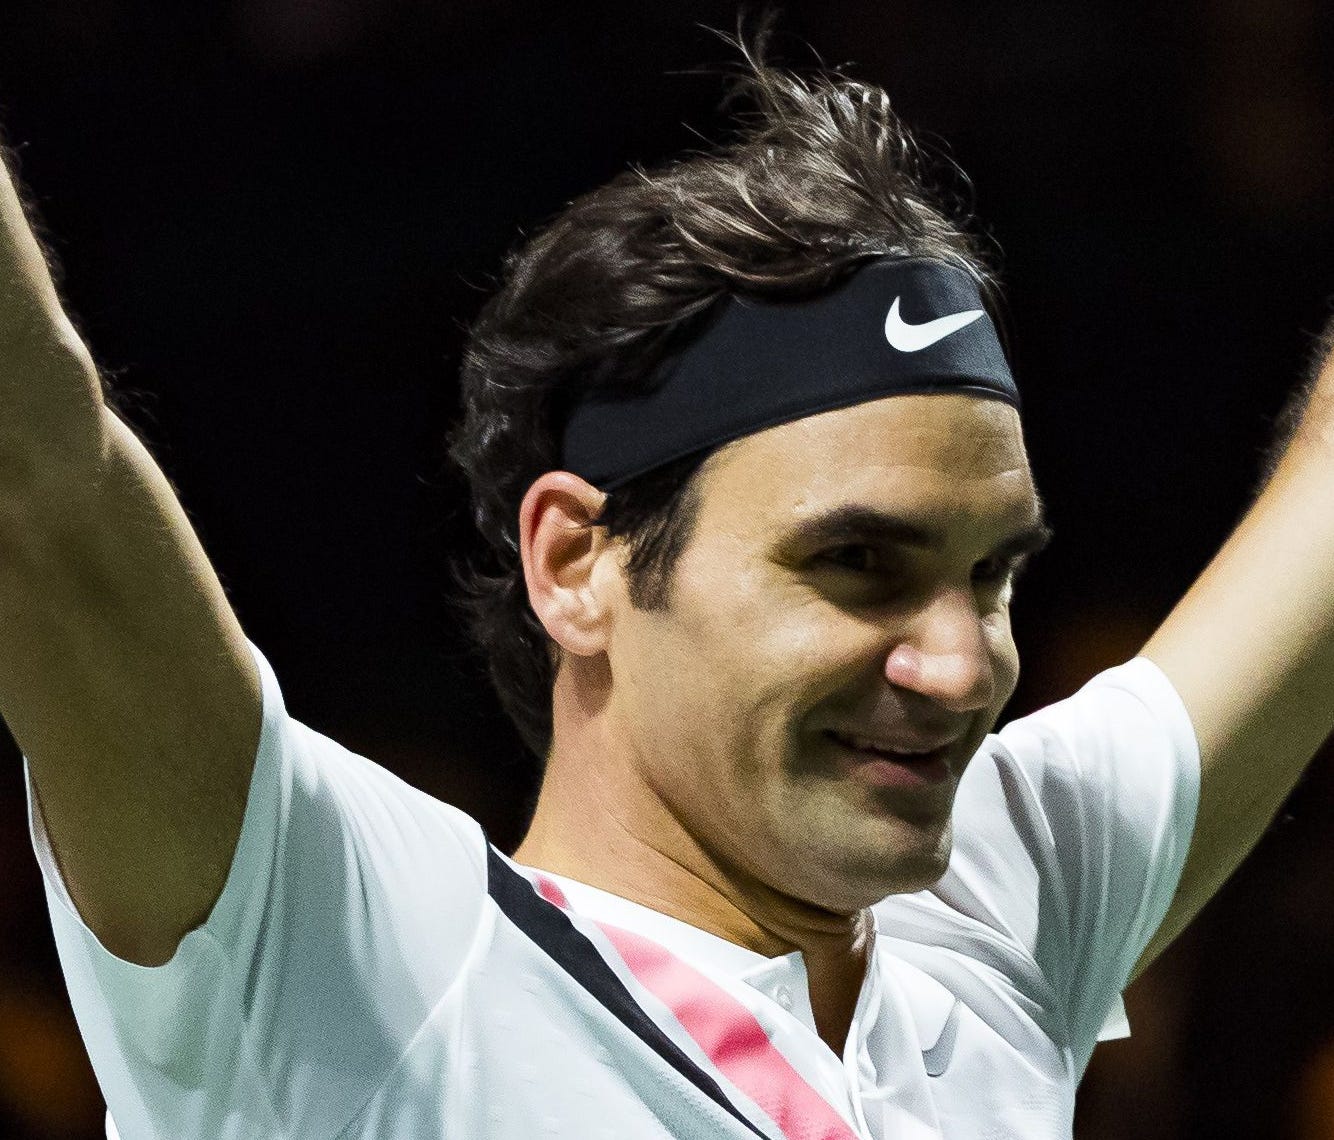 Roger Federer of Switzerland celebrates his victory against Grigor Dimitrov of Bulgaria during in the final of the ABN AMRO World Tennis Tournament in Rotterdam.